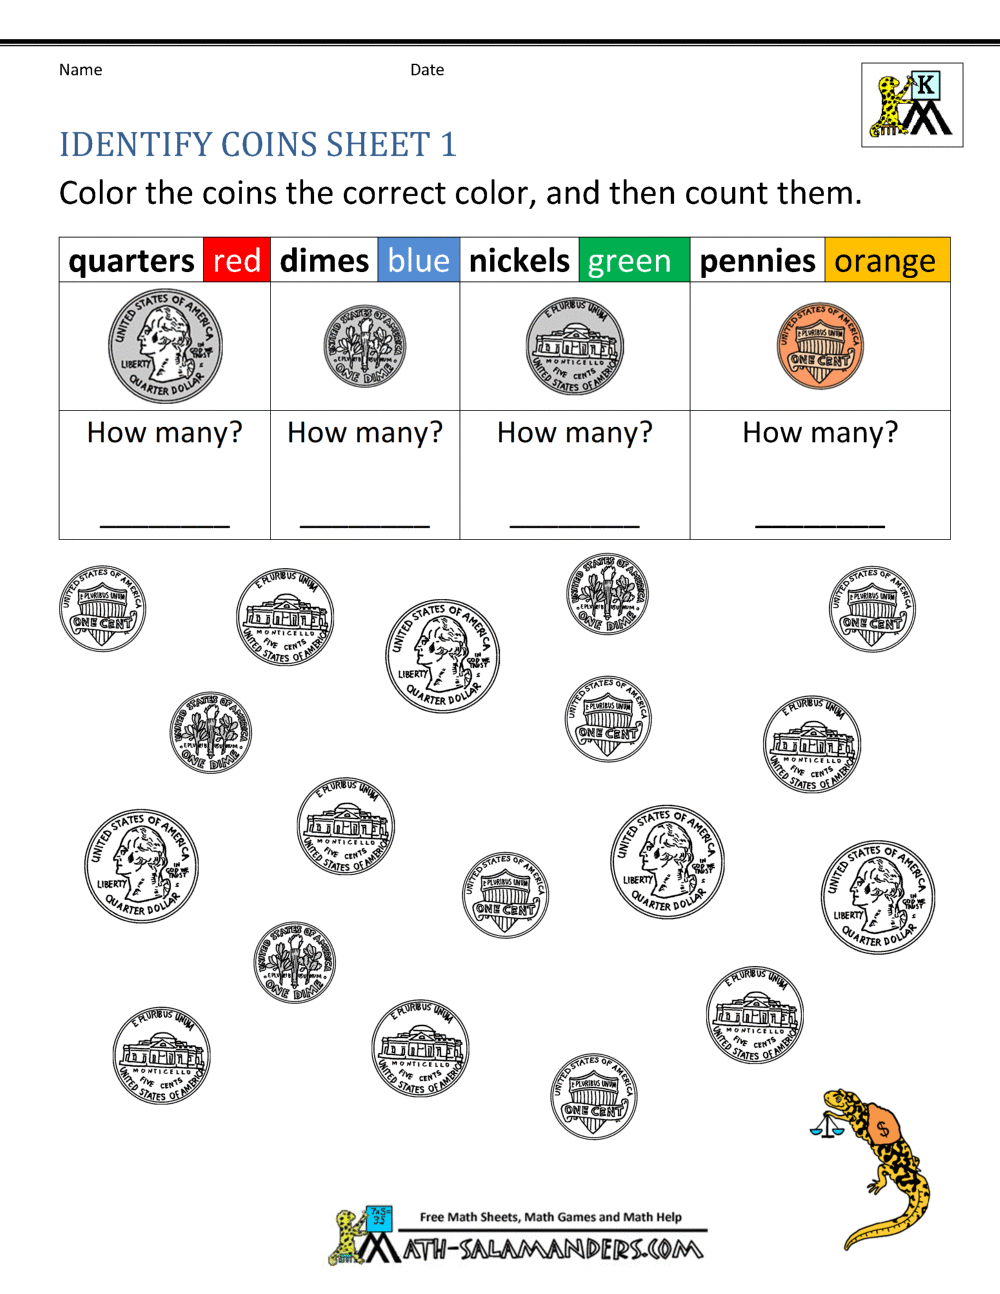 help-yourself-to-this-free-printable-coin-template-for-kids-bright